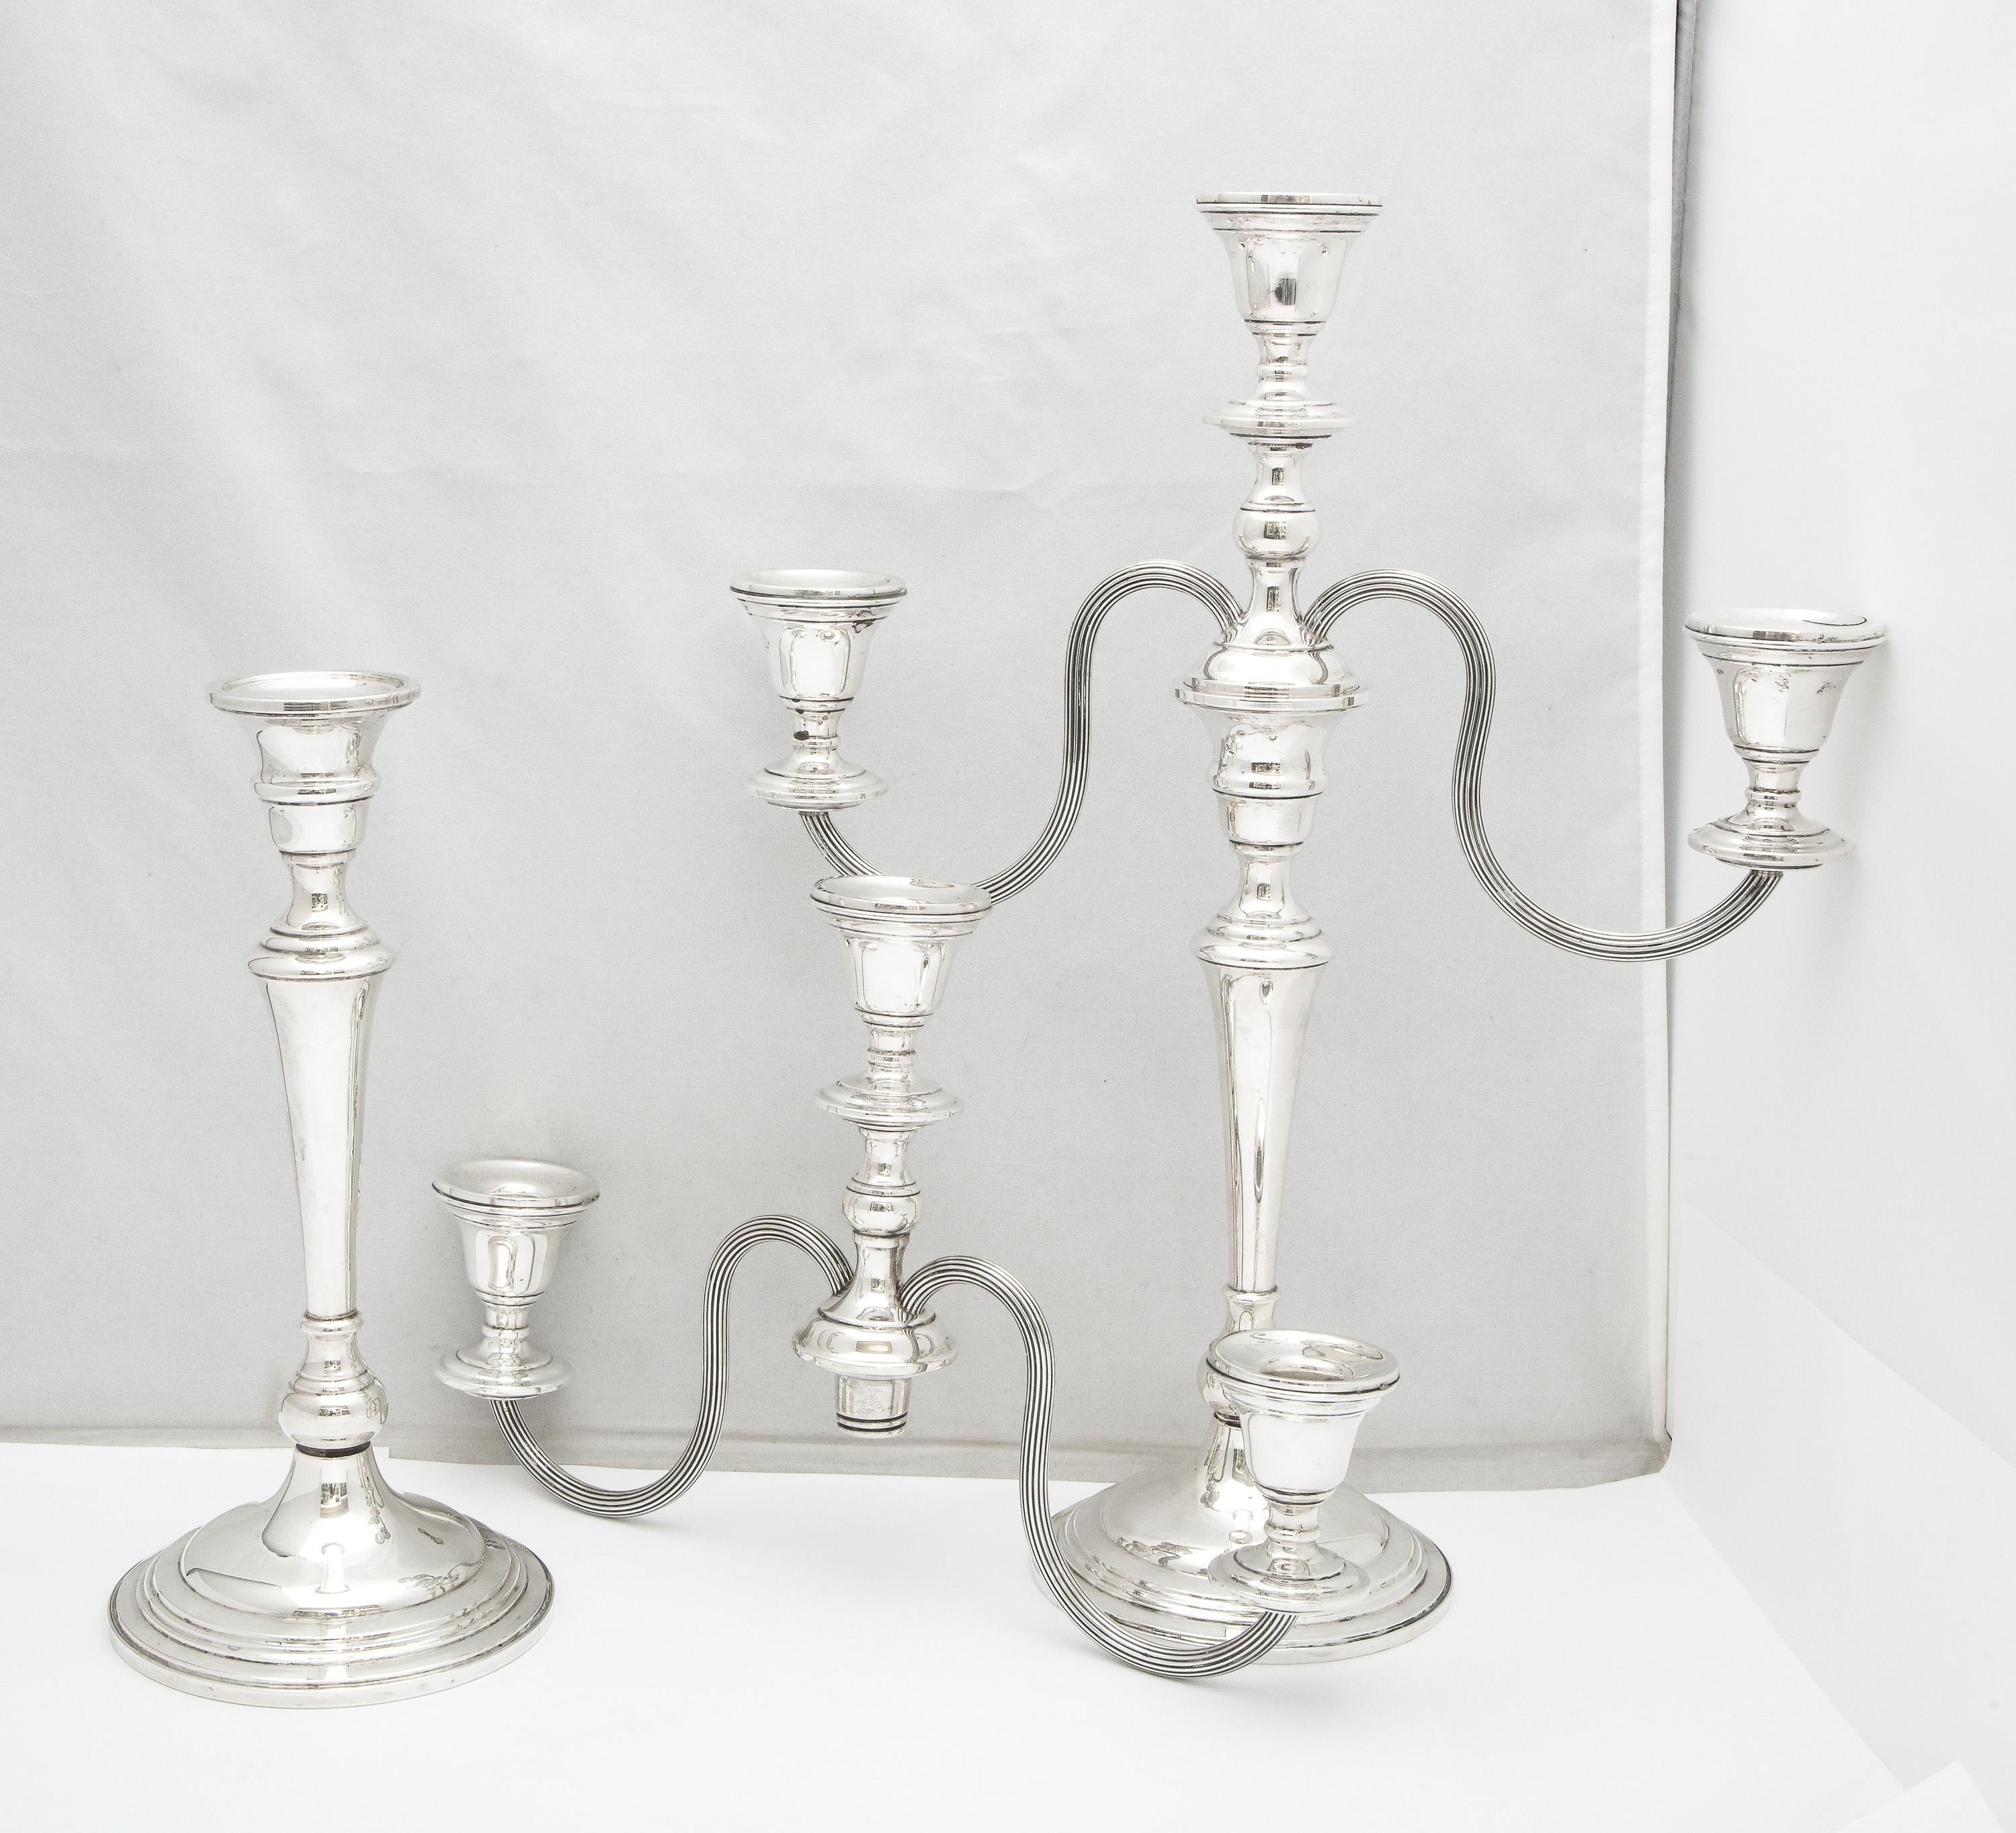 Tall, Empire-Style Pair of Sterling Silver Candelabra For Sale 3